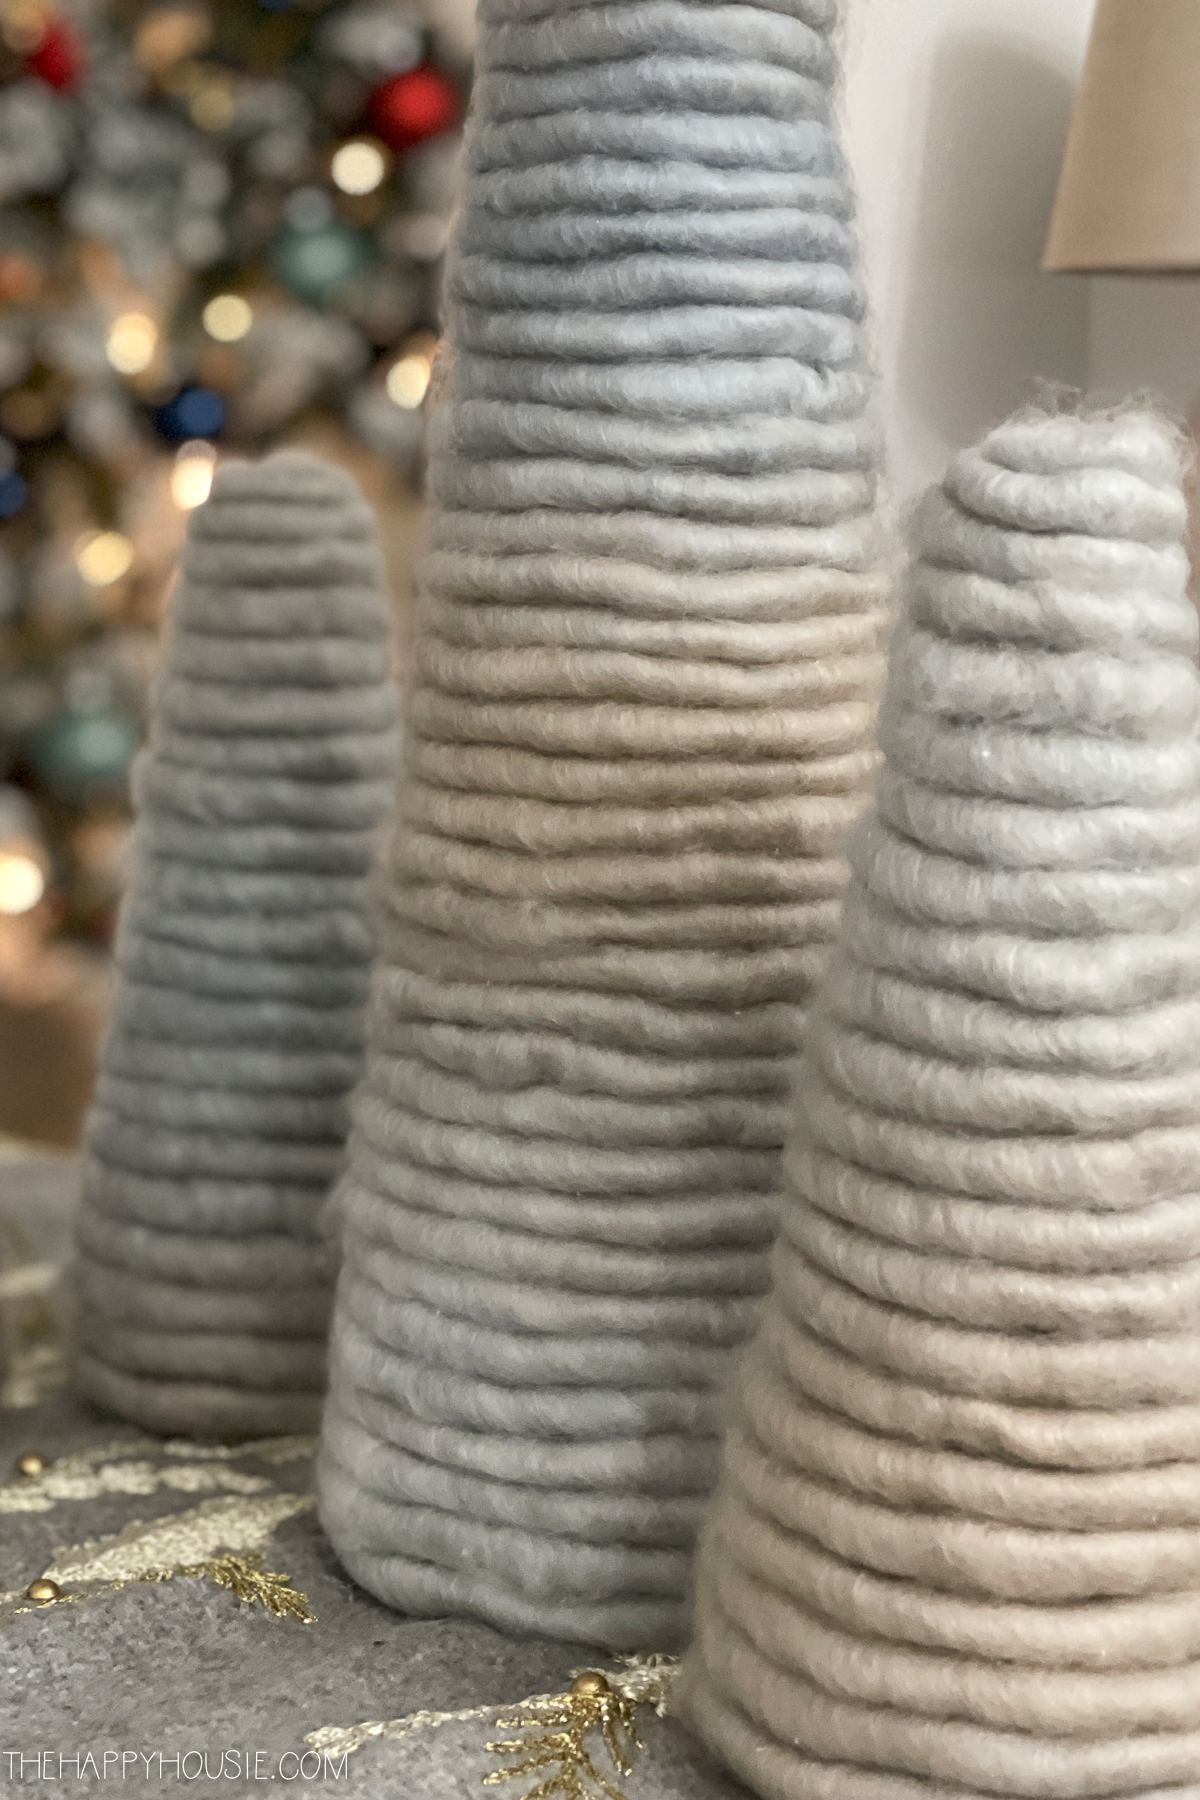 The wool trees on the table.